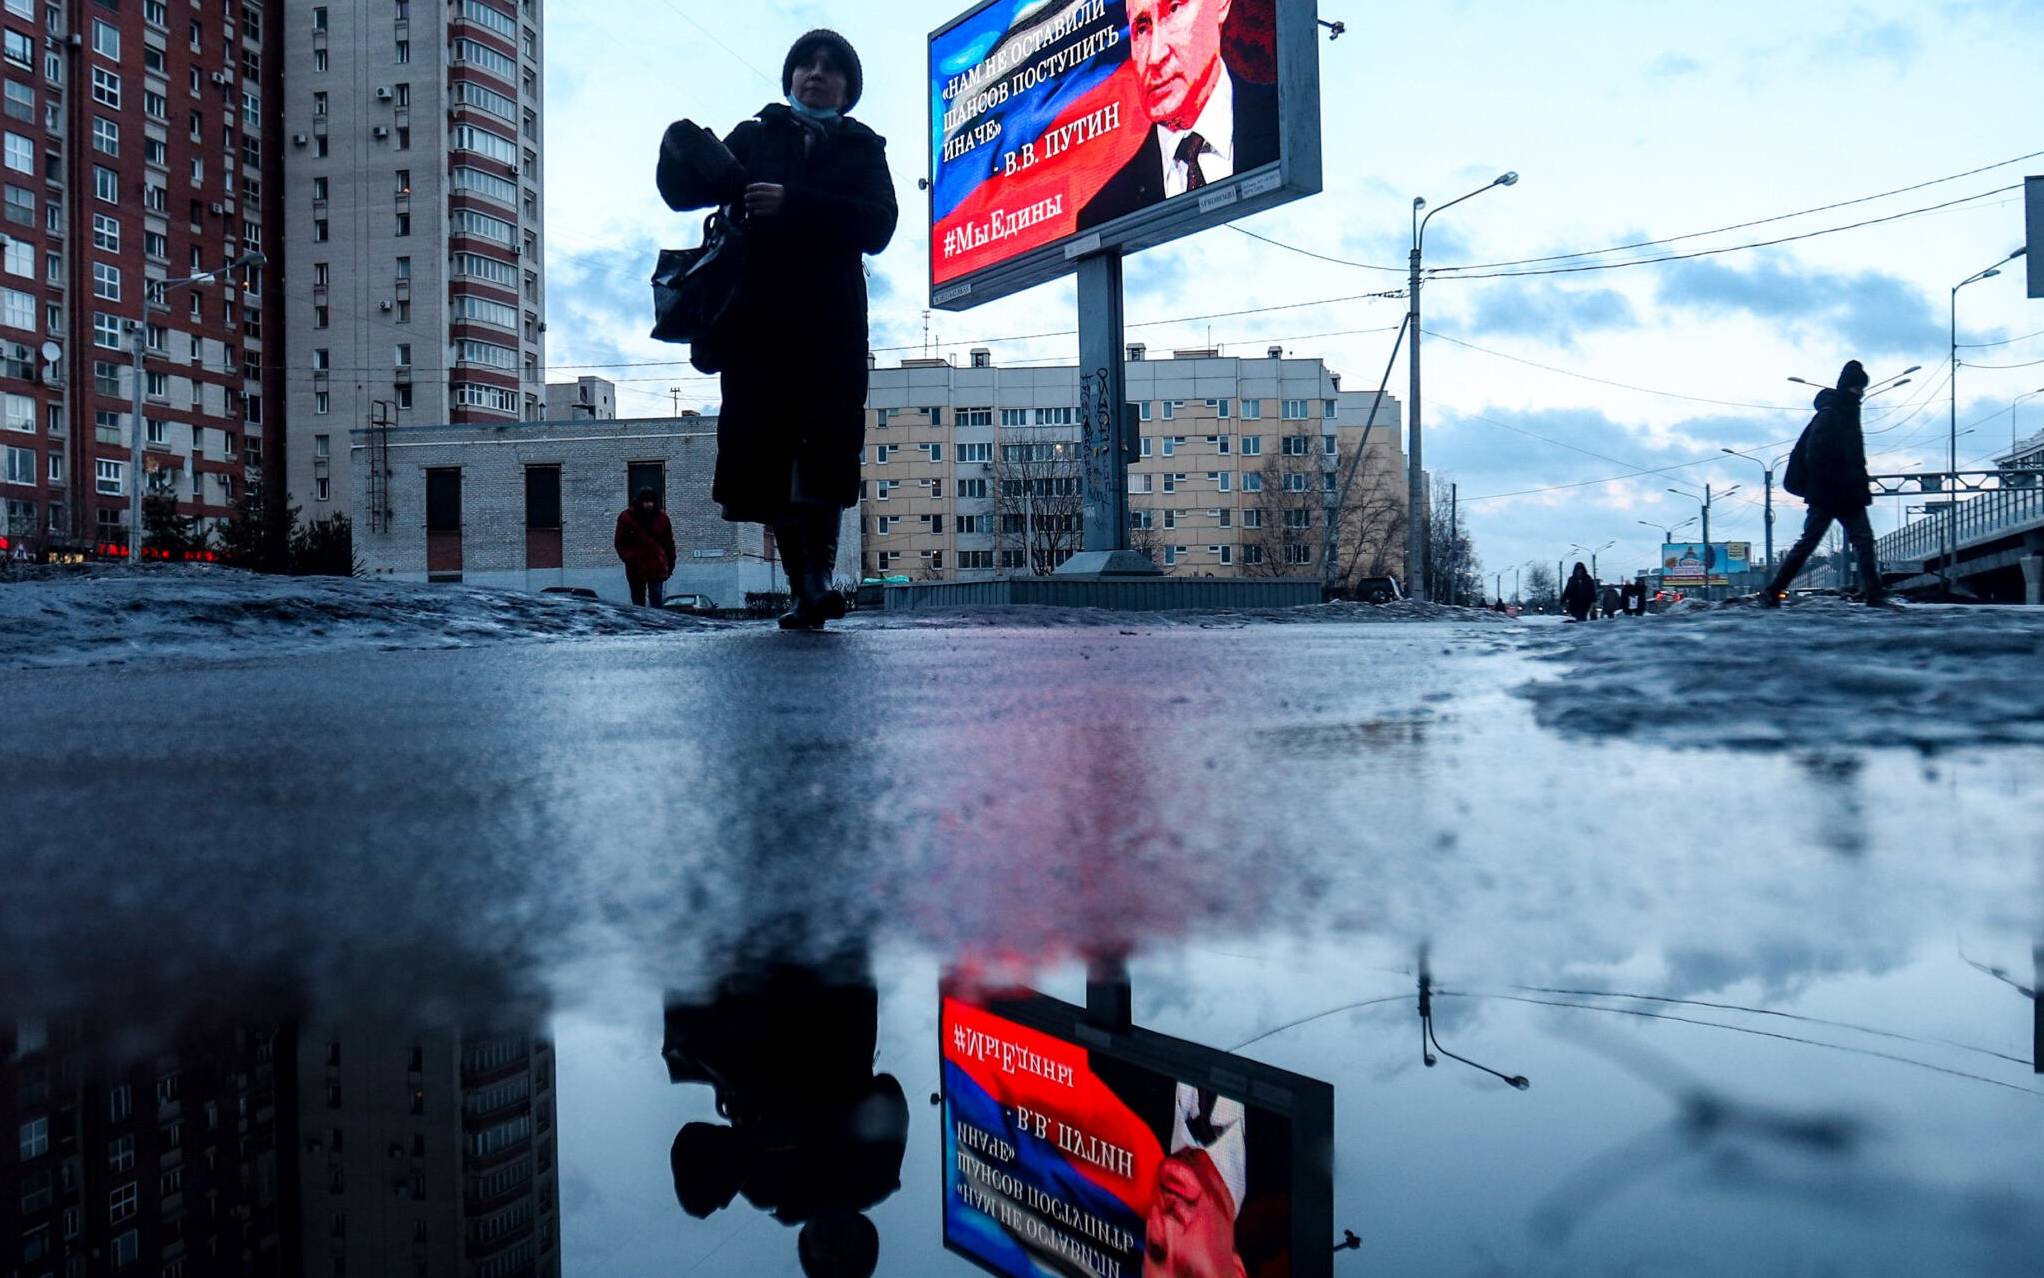 Pedestrians walk past a board displaying an image of Russian President Vladimir Putin and a quote from the recent his address to the nation: "We had no other chance but to act differently" in Saint Petersburg, on February 25, 2022. (Photo by Sergei MIKHAILICHENKO / AFP)